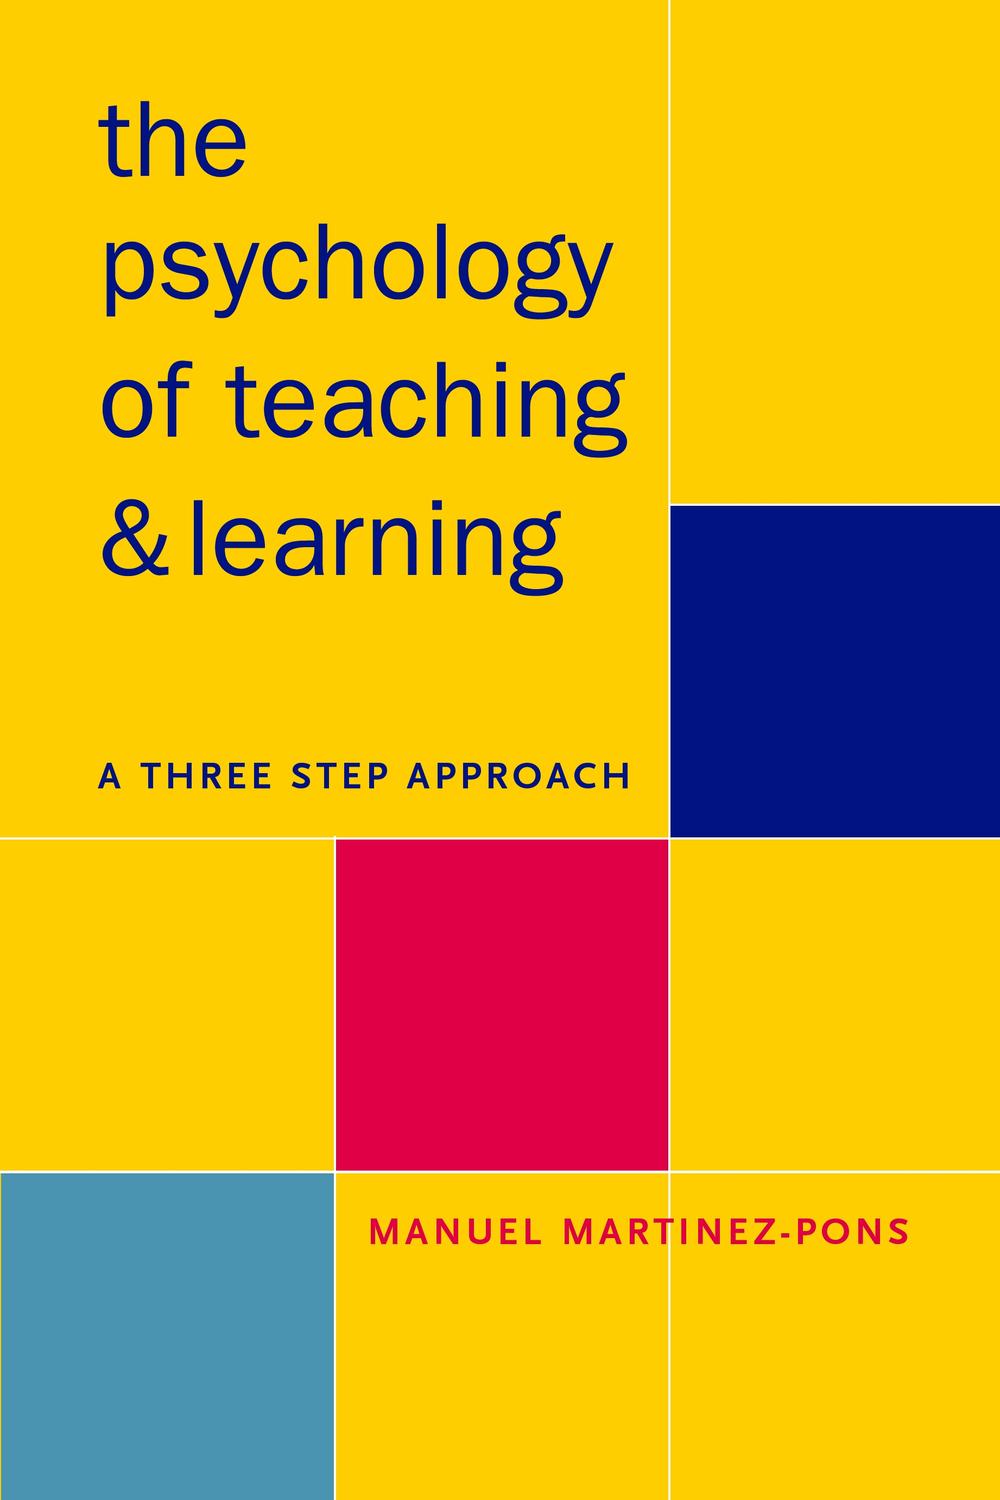 Psychology of Teaching and Learning - Manuel Martinez-Pons